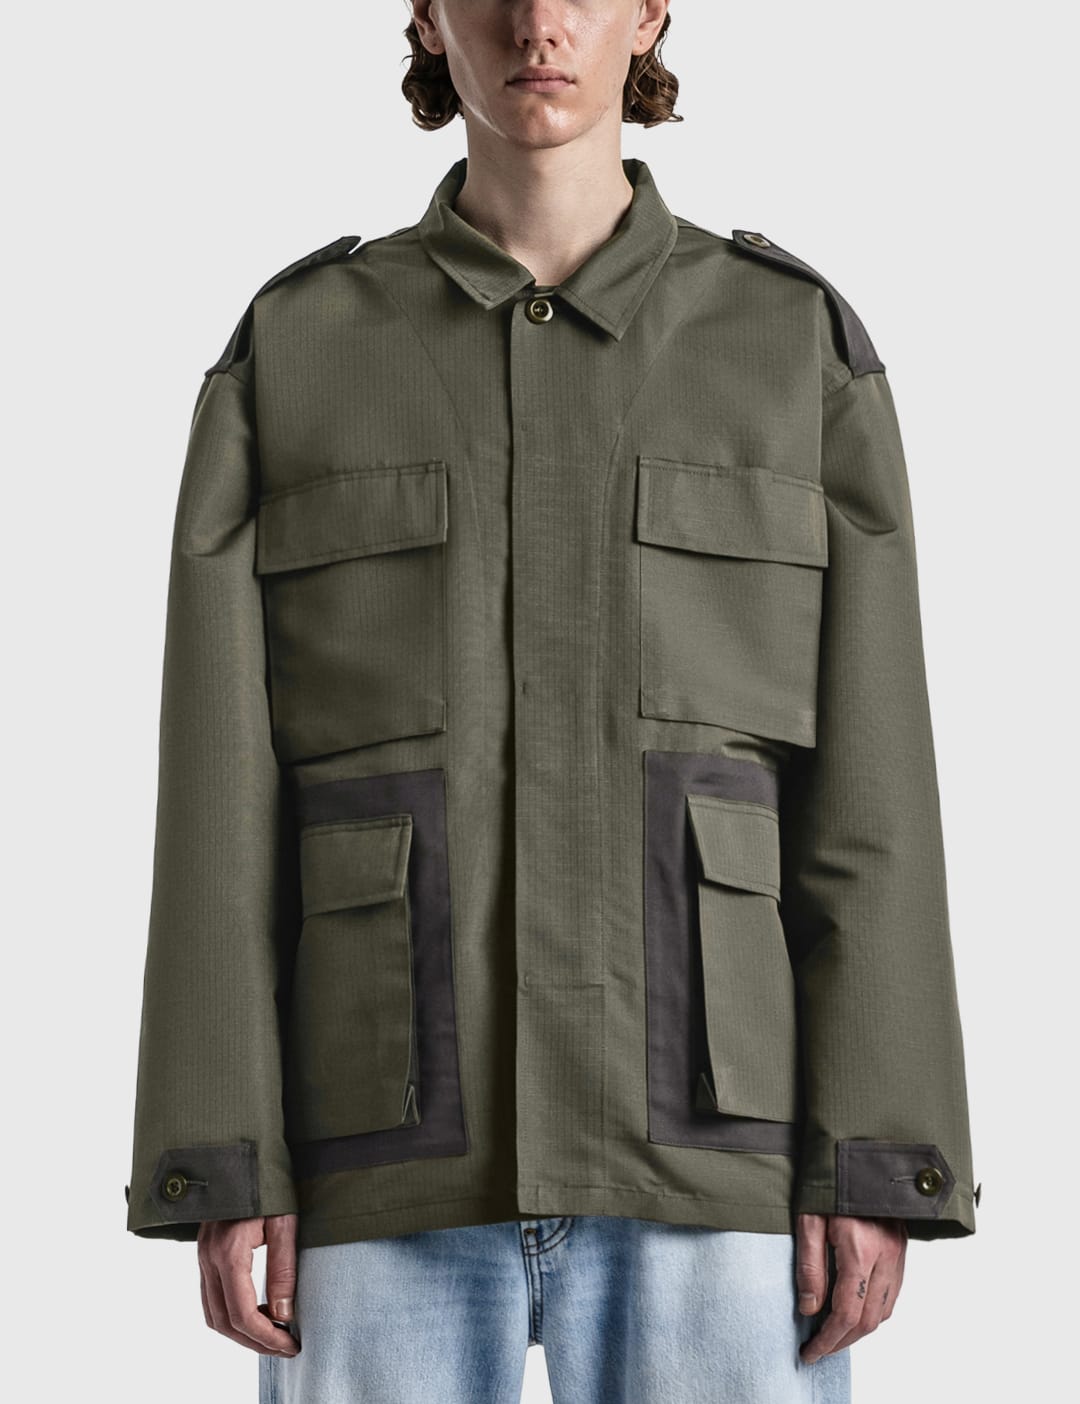 Acne Studios - Casual Ripstop Jacket | HBX - Globally Curated